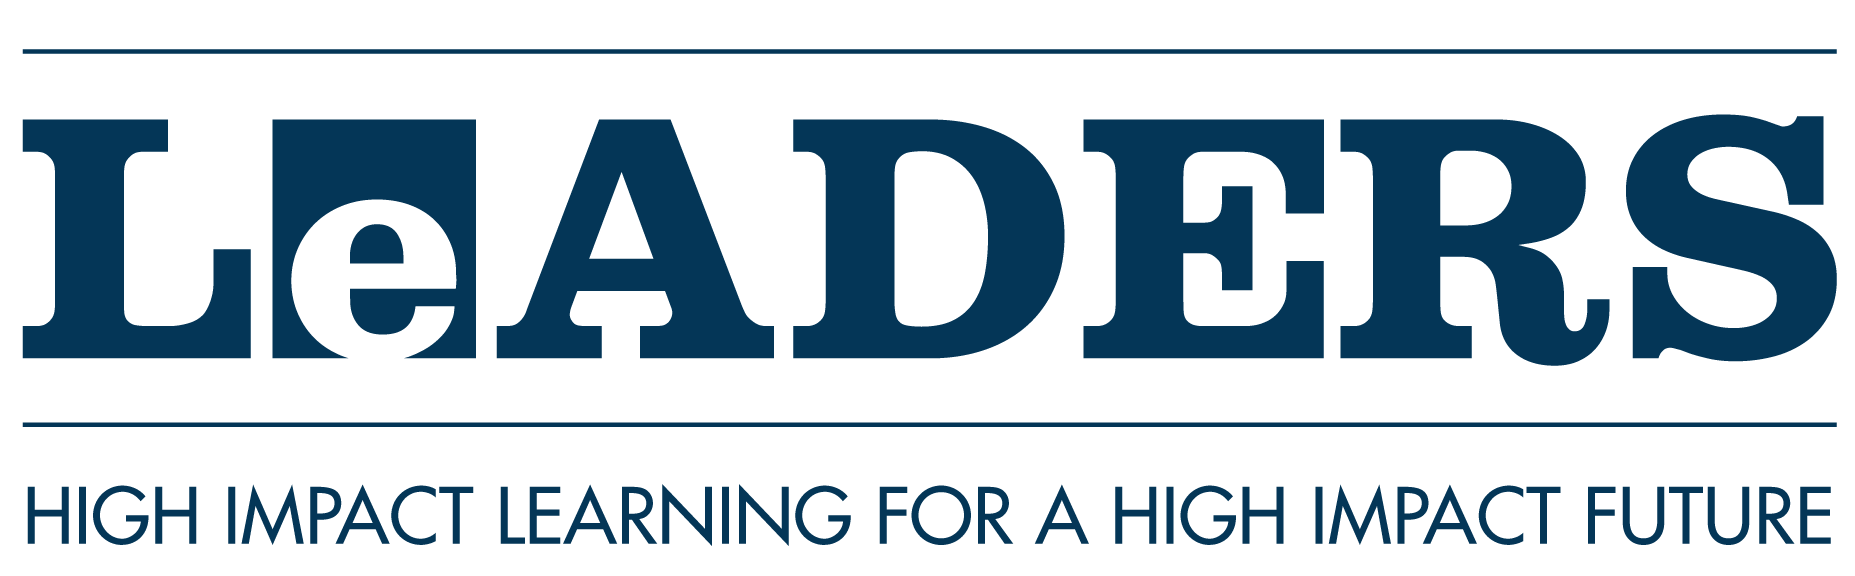 LeADERS Logo with Tagline